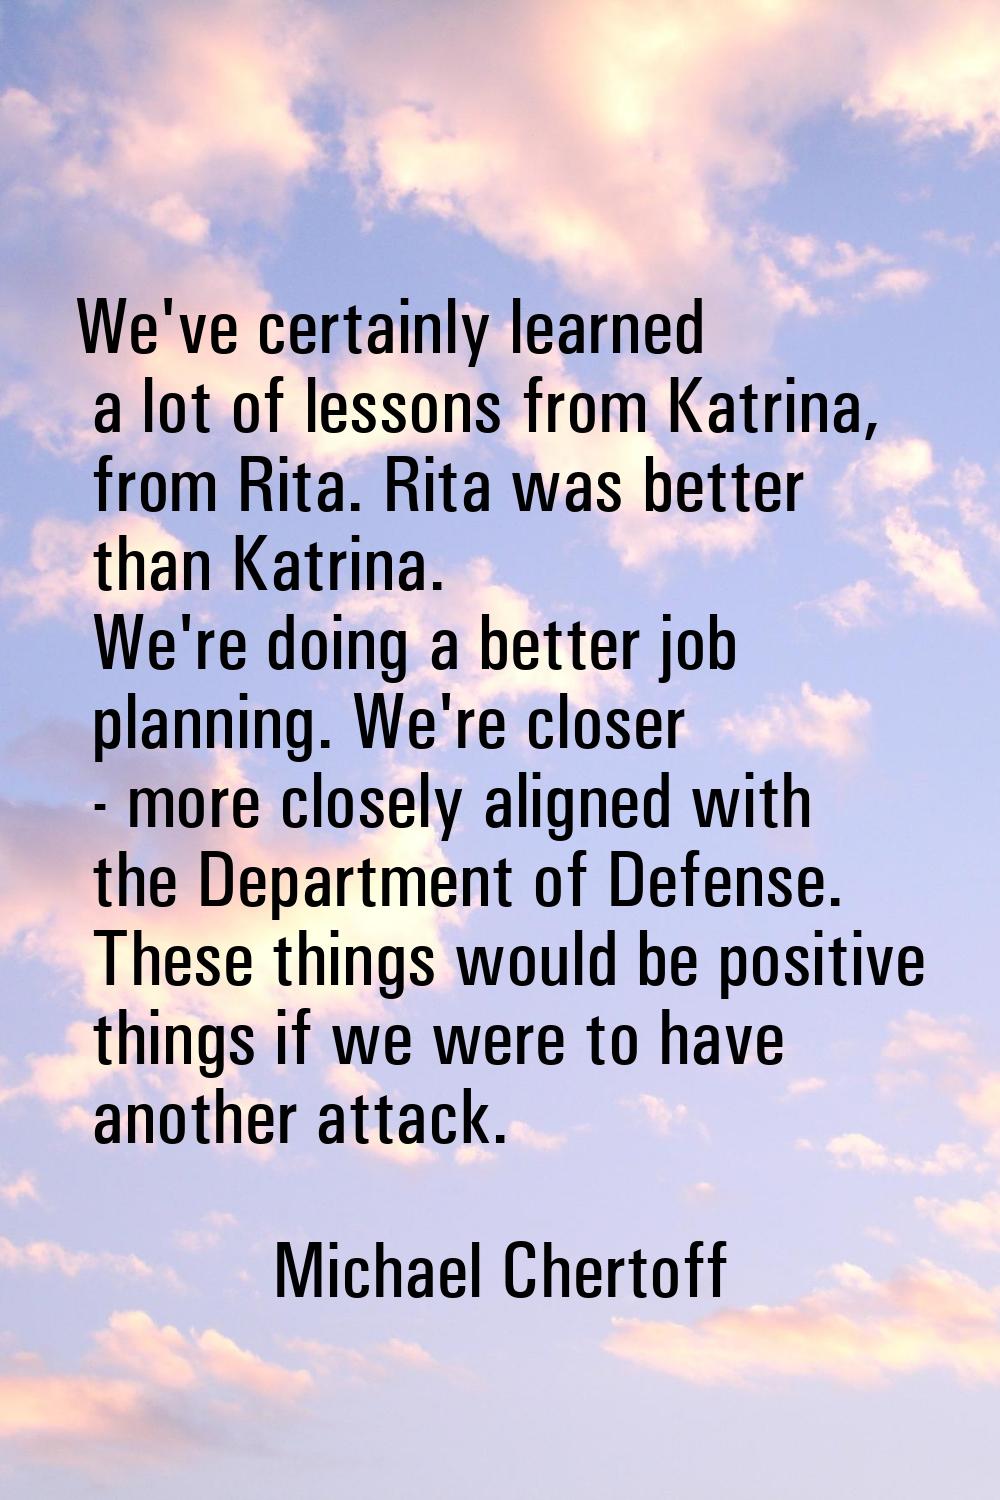 We've certainly learned a lot of lessons from Katrina, from Rita. Rita was better than Katrina. We'